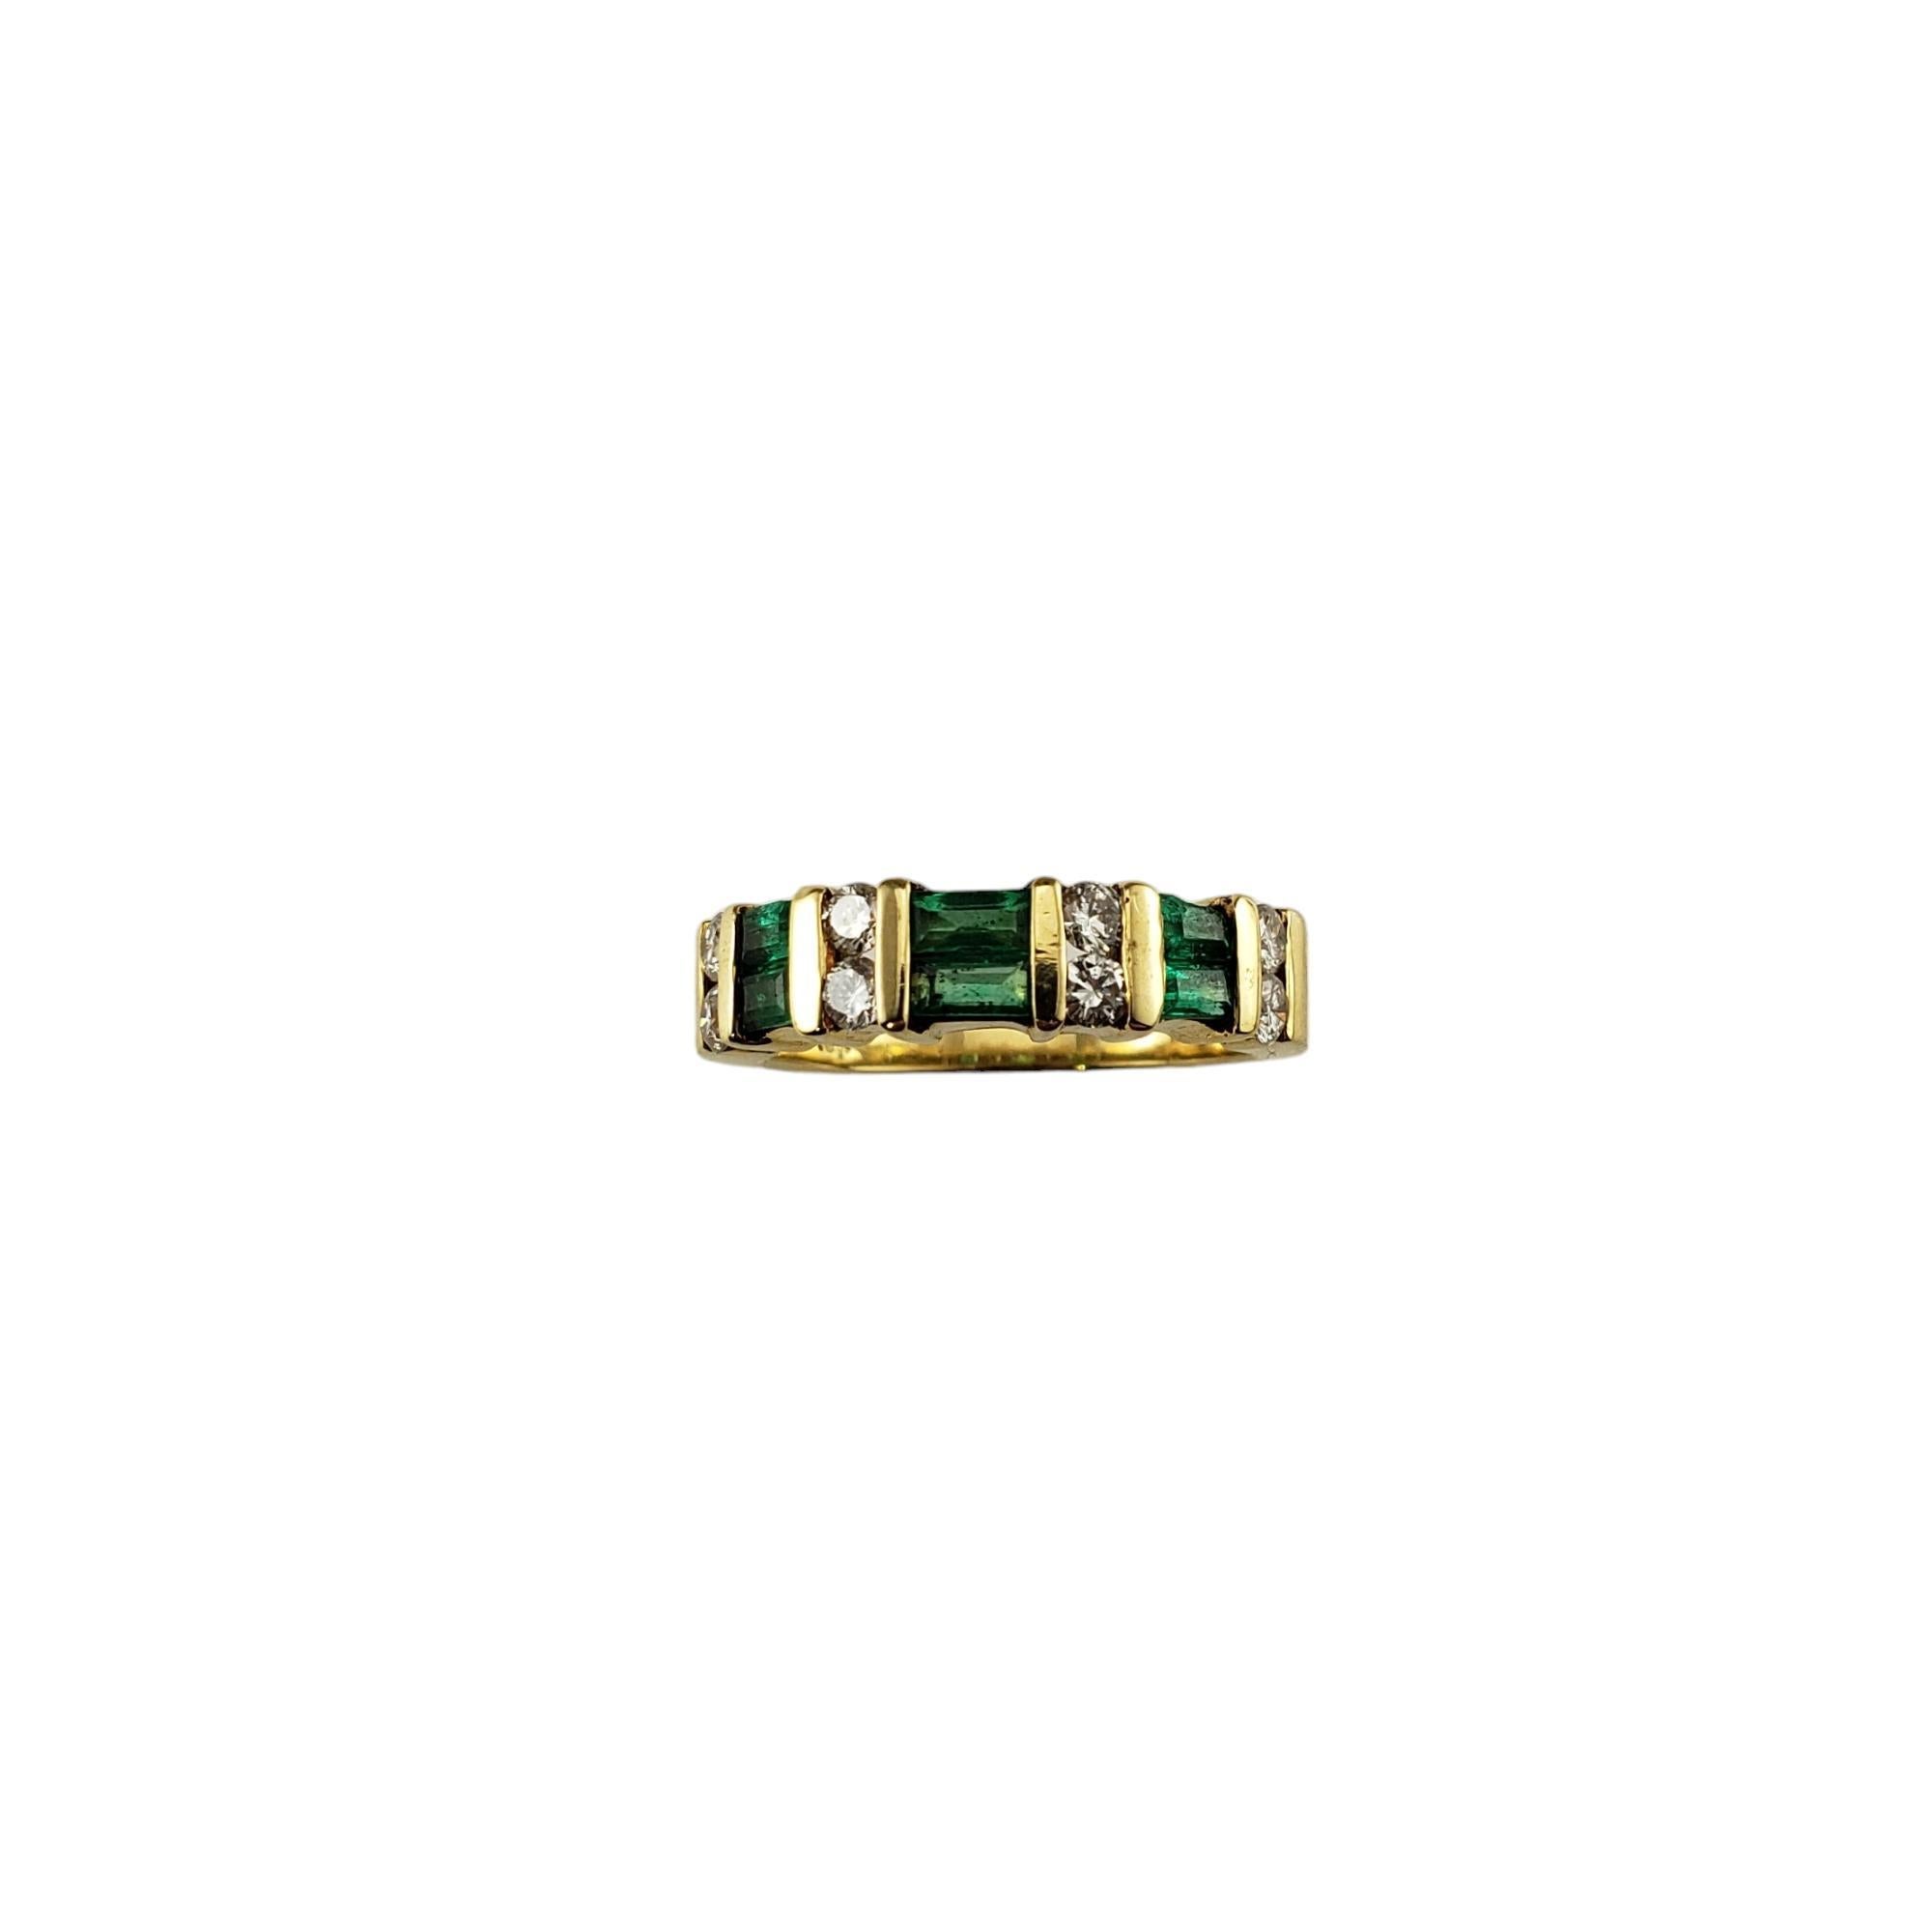 18K Yellow Gold Emerald and Diamond Ring Size 5.75 #16332 For Sale